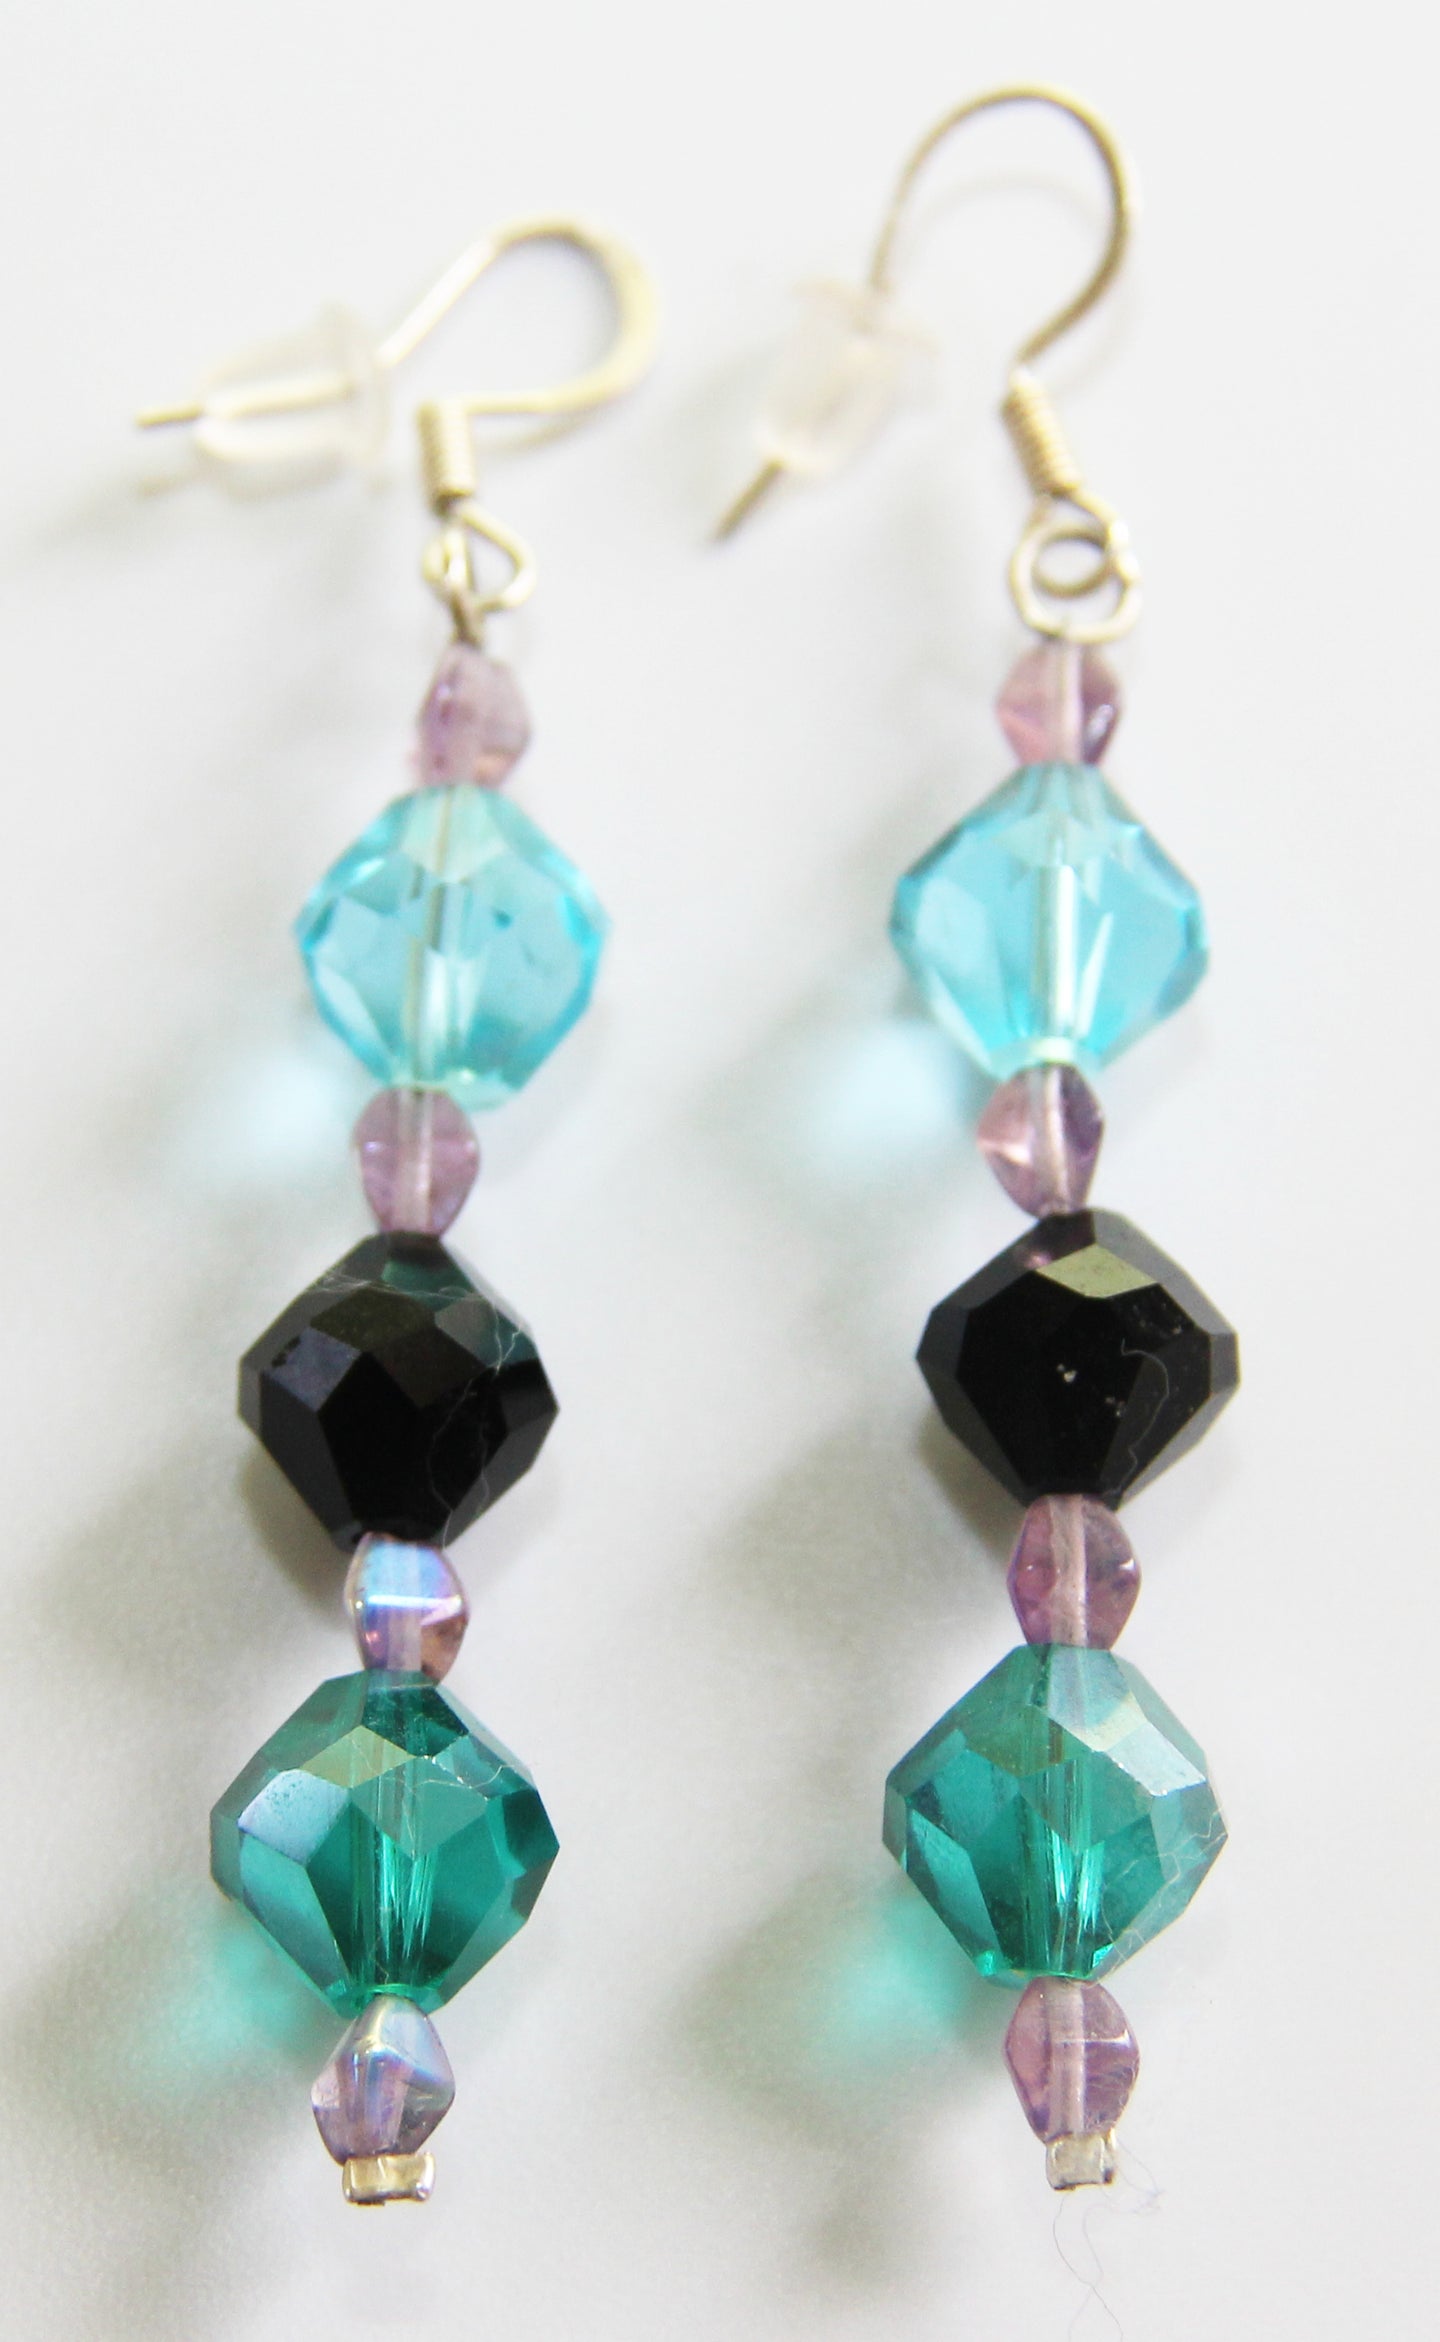 Turquoise/Black/Green Faceted Crystals Earrings